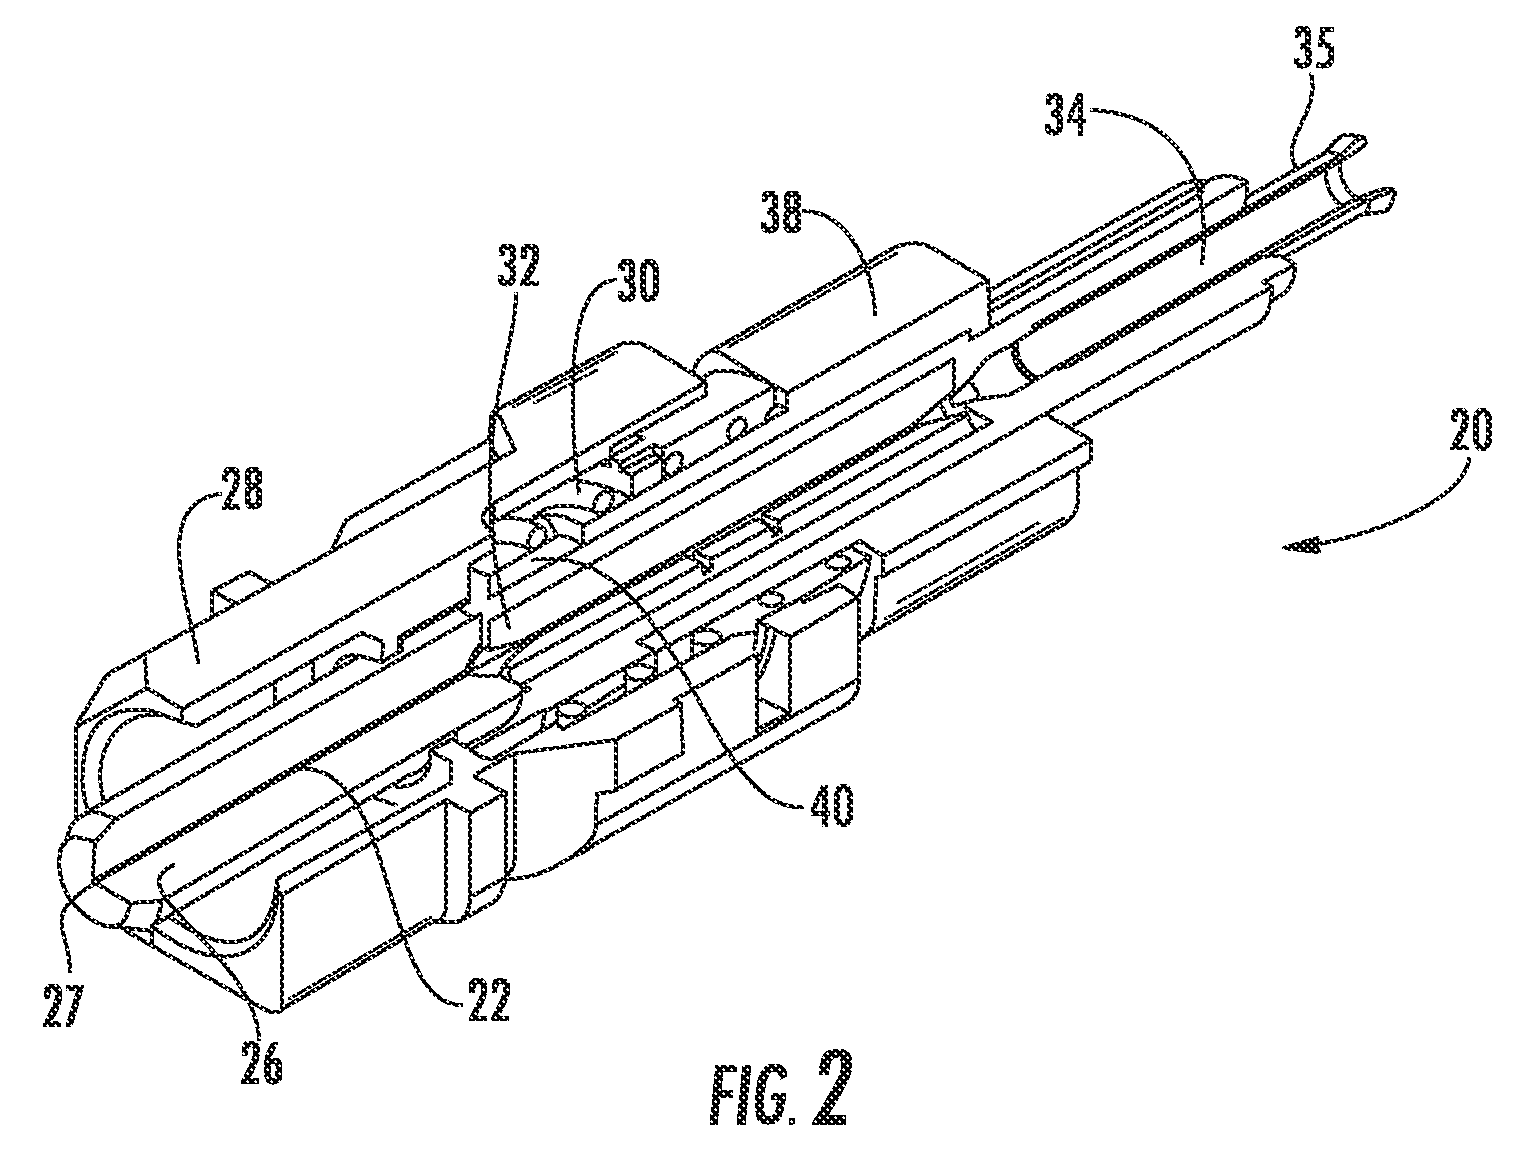 Laser-Shaped Optical Fibers Along with Optical Assemblies and Methods Therefor